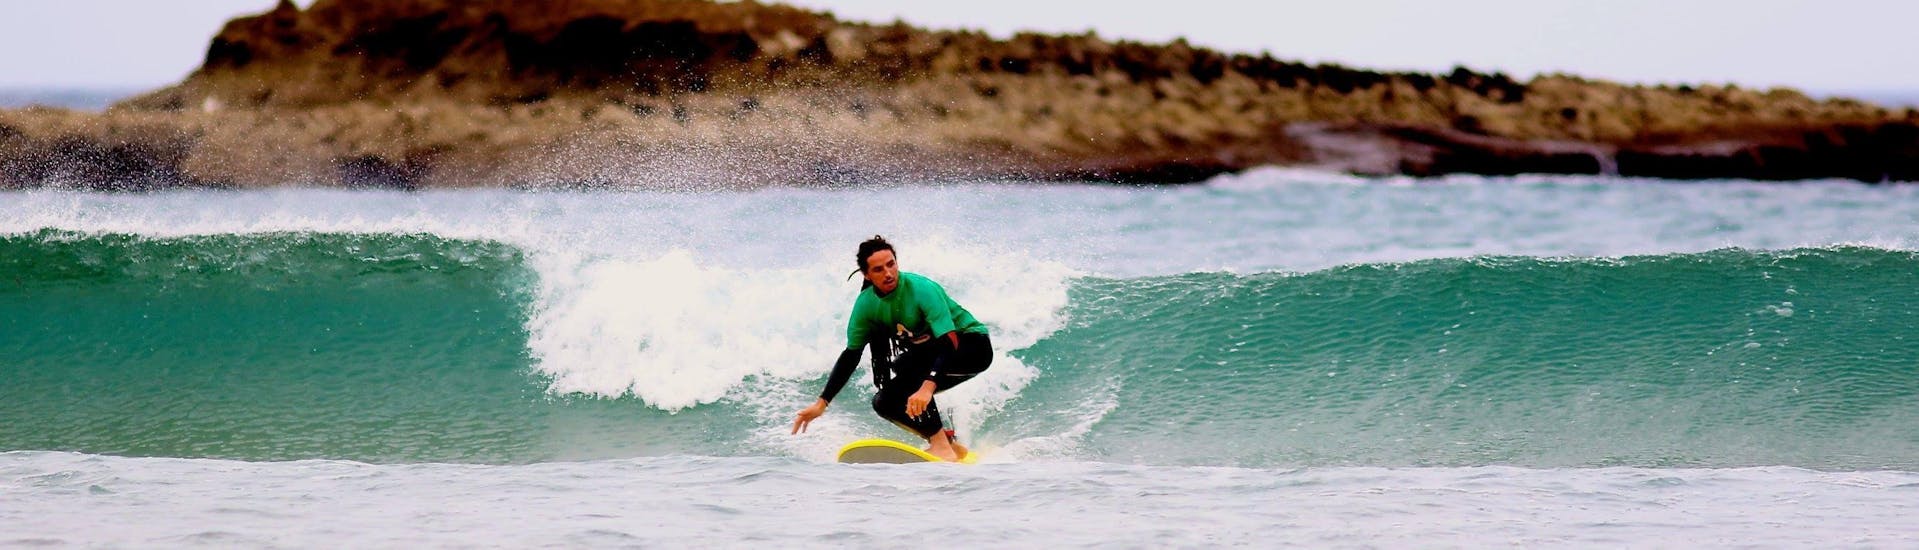 A young surfer is riding a wave during a Private Surfing Lessons for Kids and Adults - All Levels with Amado Surf School.